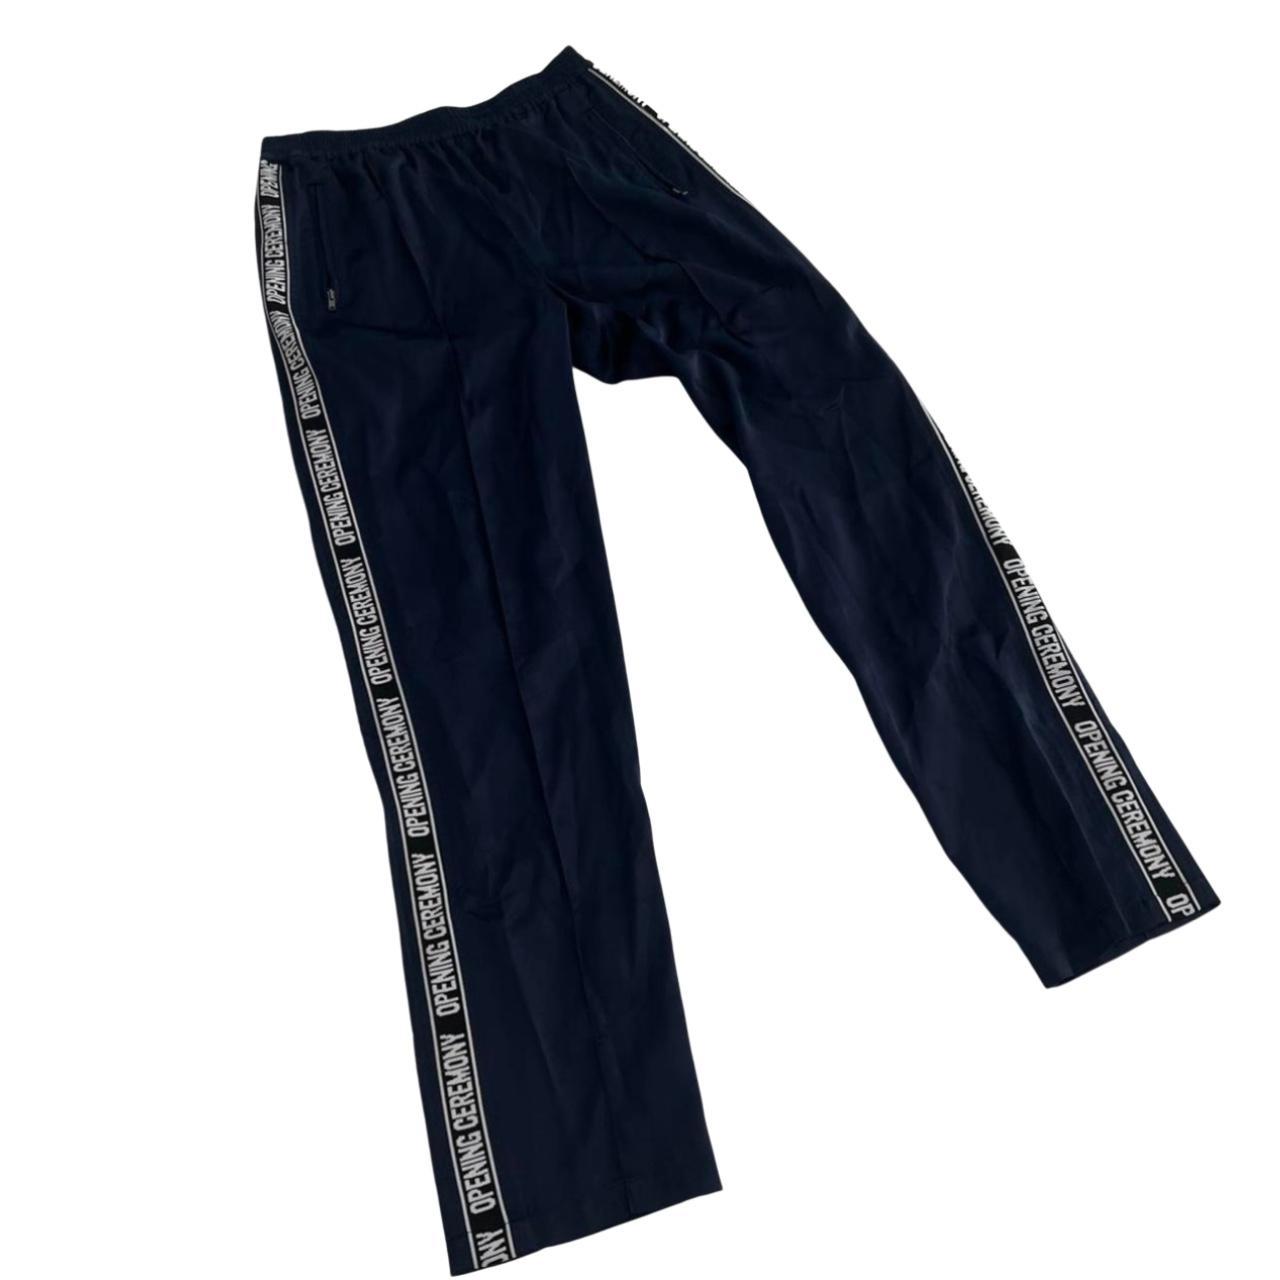 Product Image 1 - Silky opening ceremony pants
Size: small
Price: